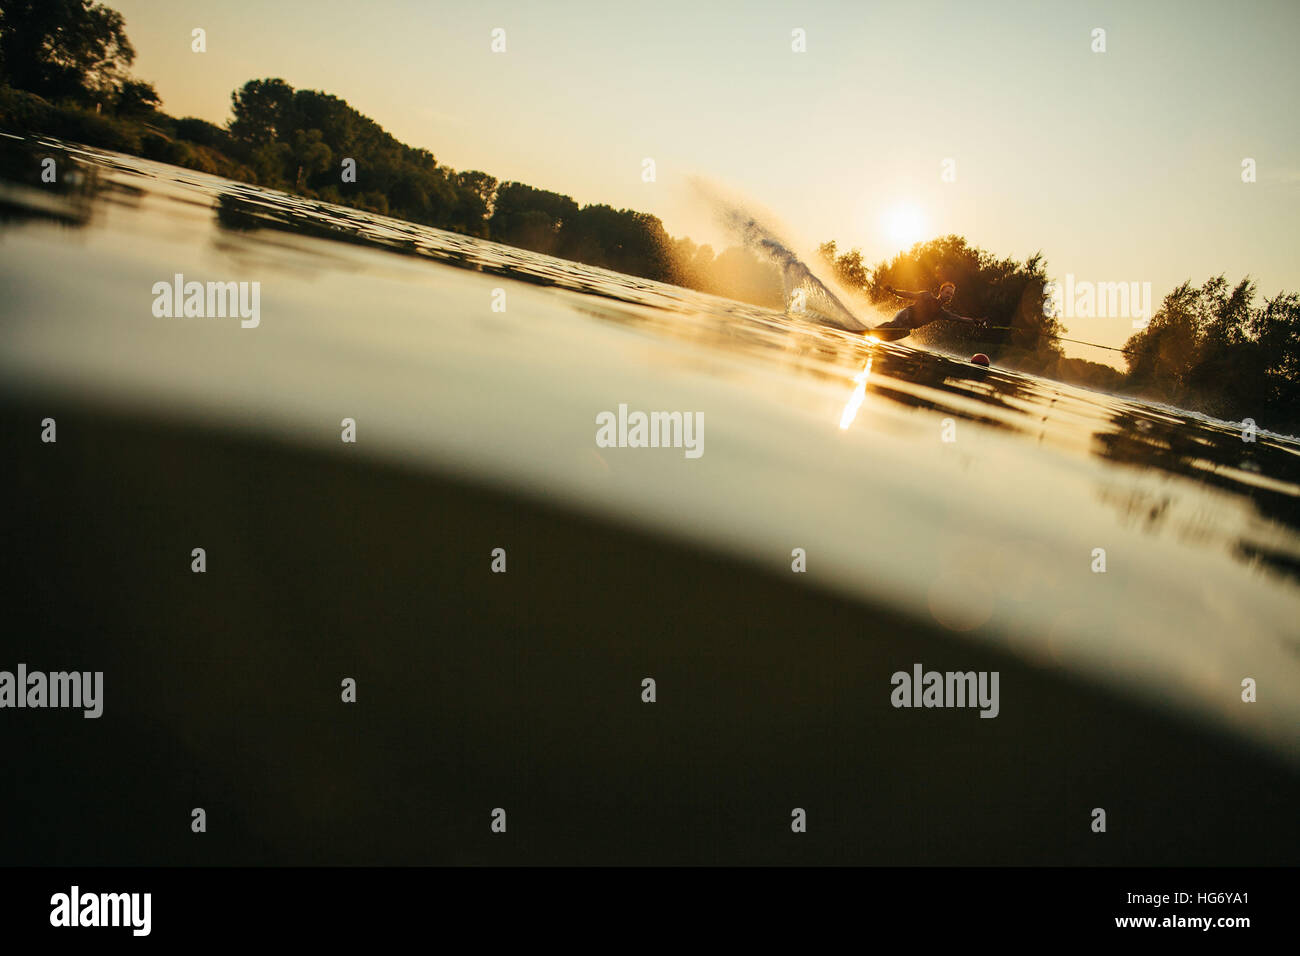 Low angle shot of man wakeboarding on a lake. Water skiing at sunset. Stock Photo